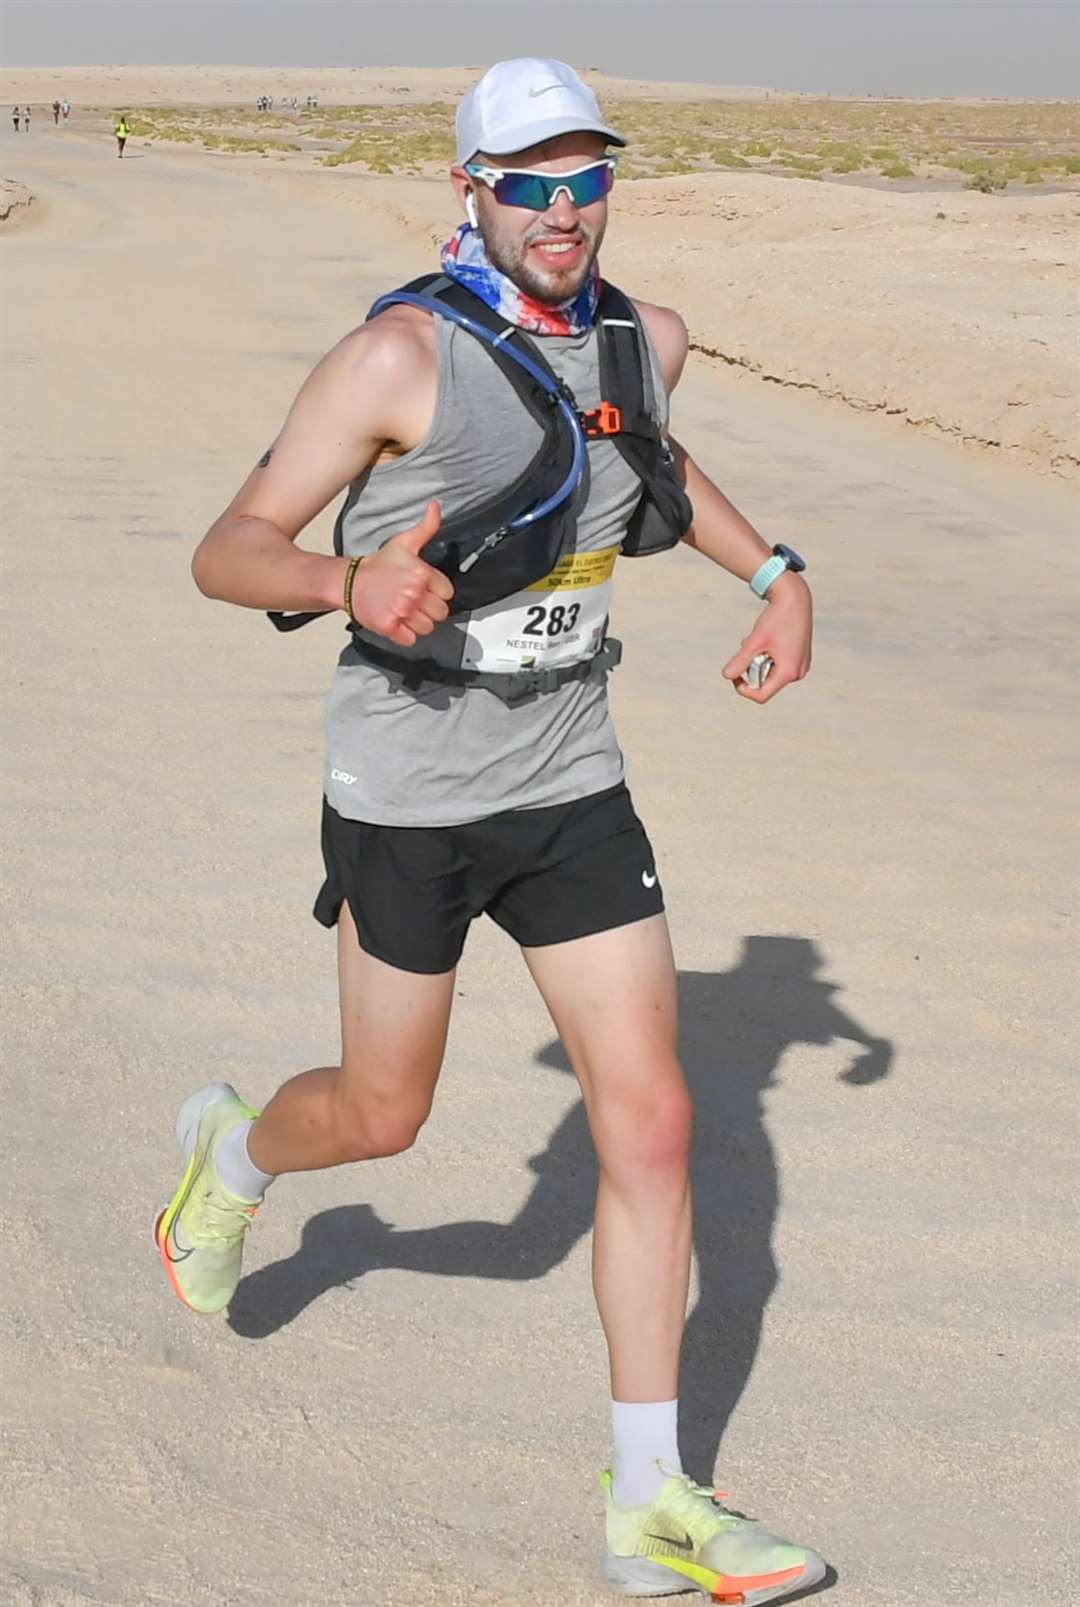 Bearsted's Ben Nestel taking part in the 50k race. Picture: Jules Annan